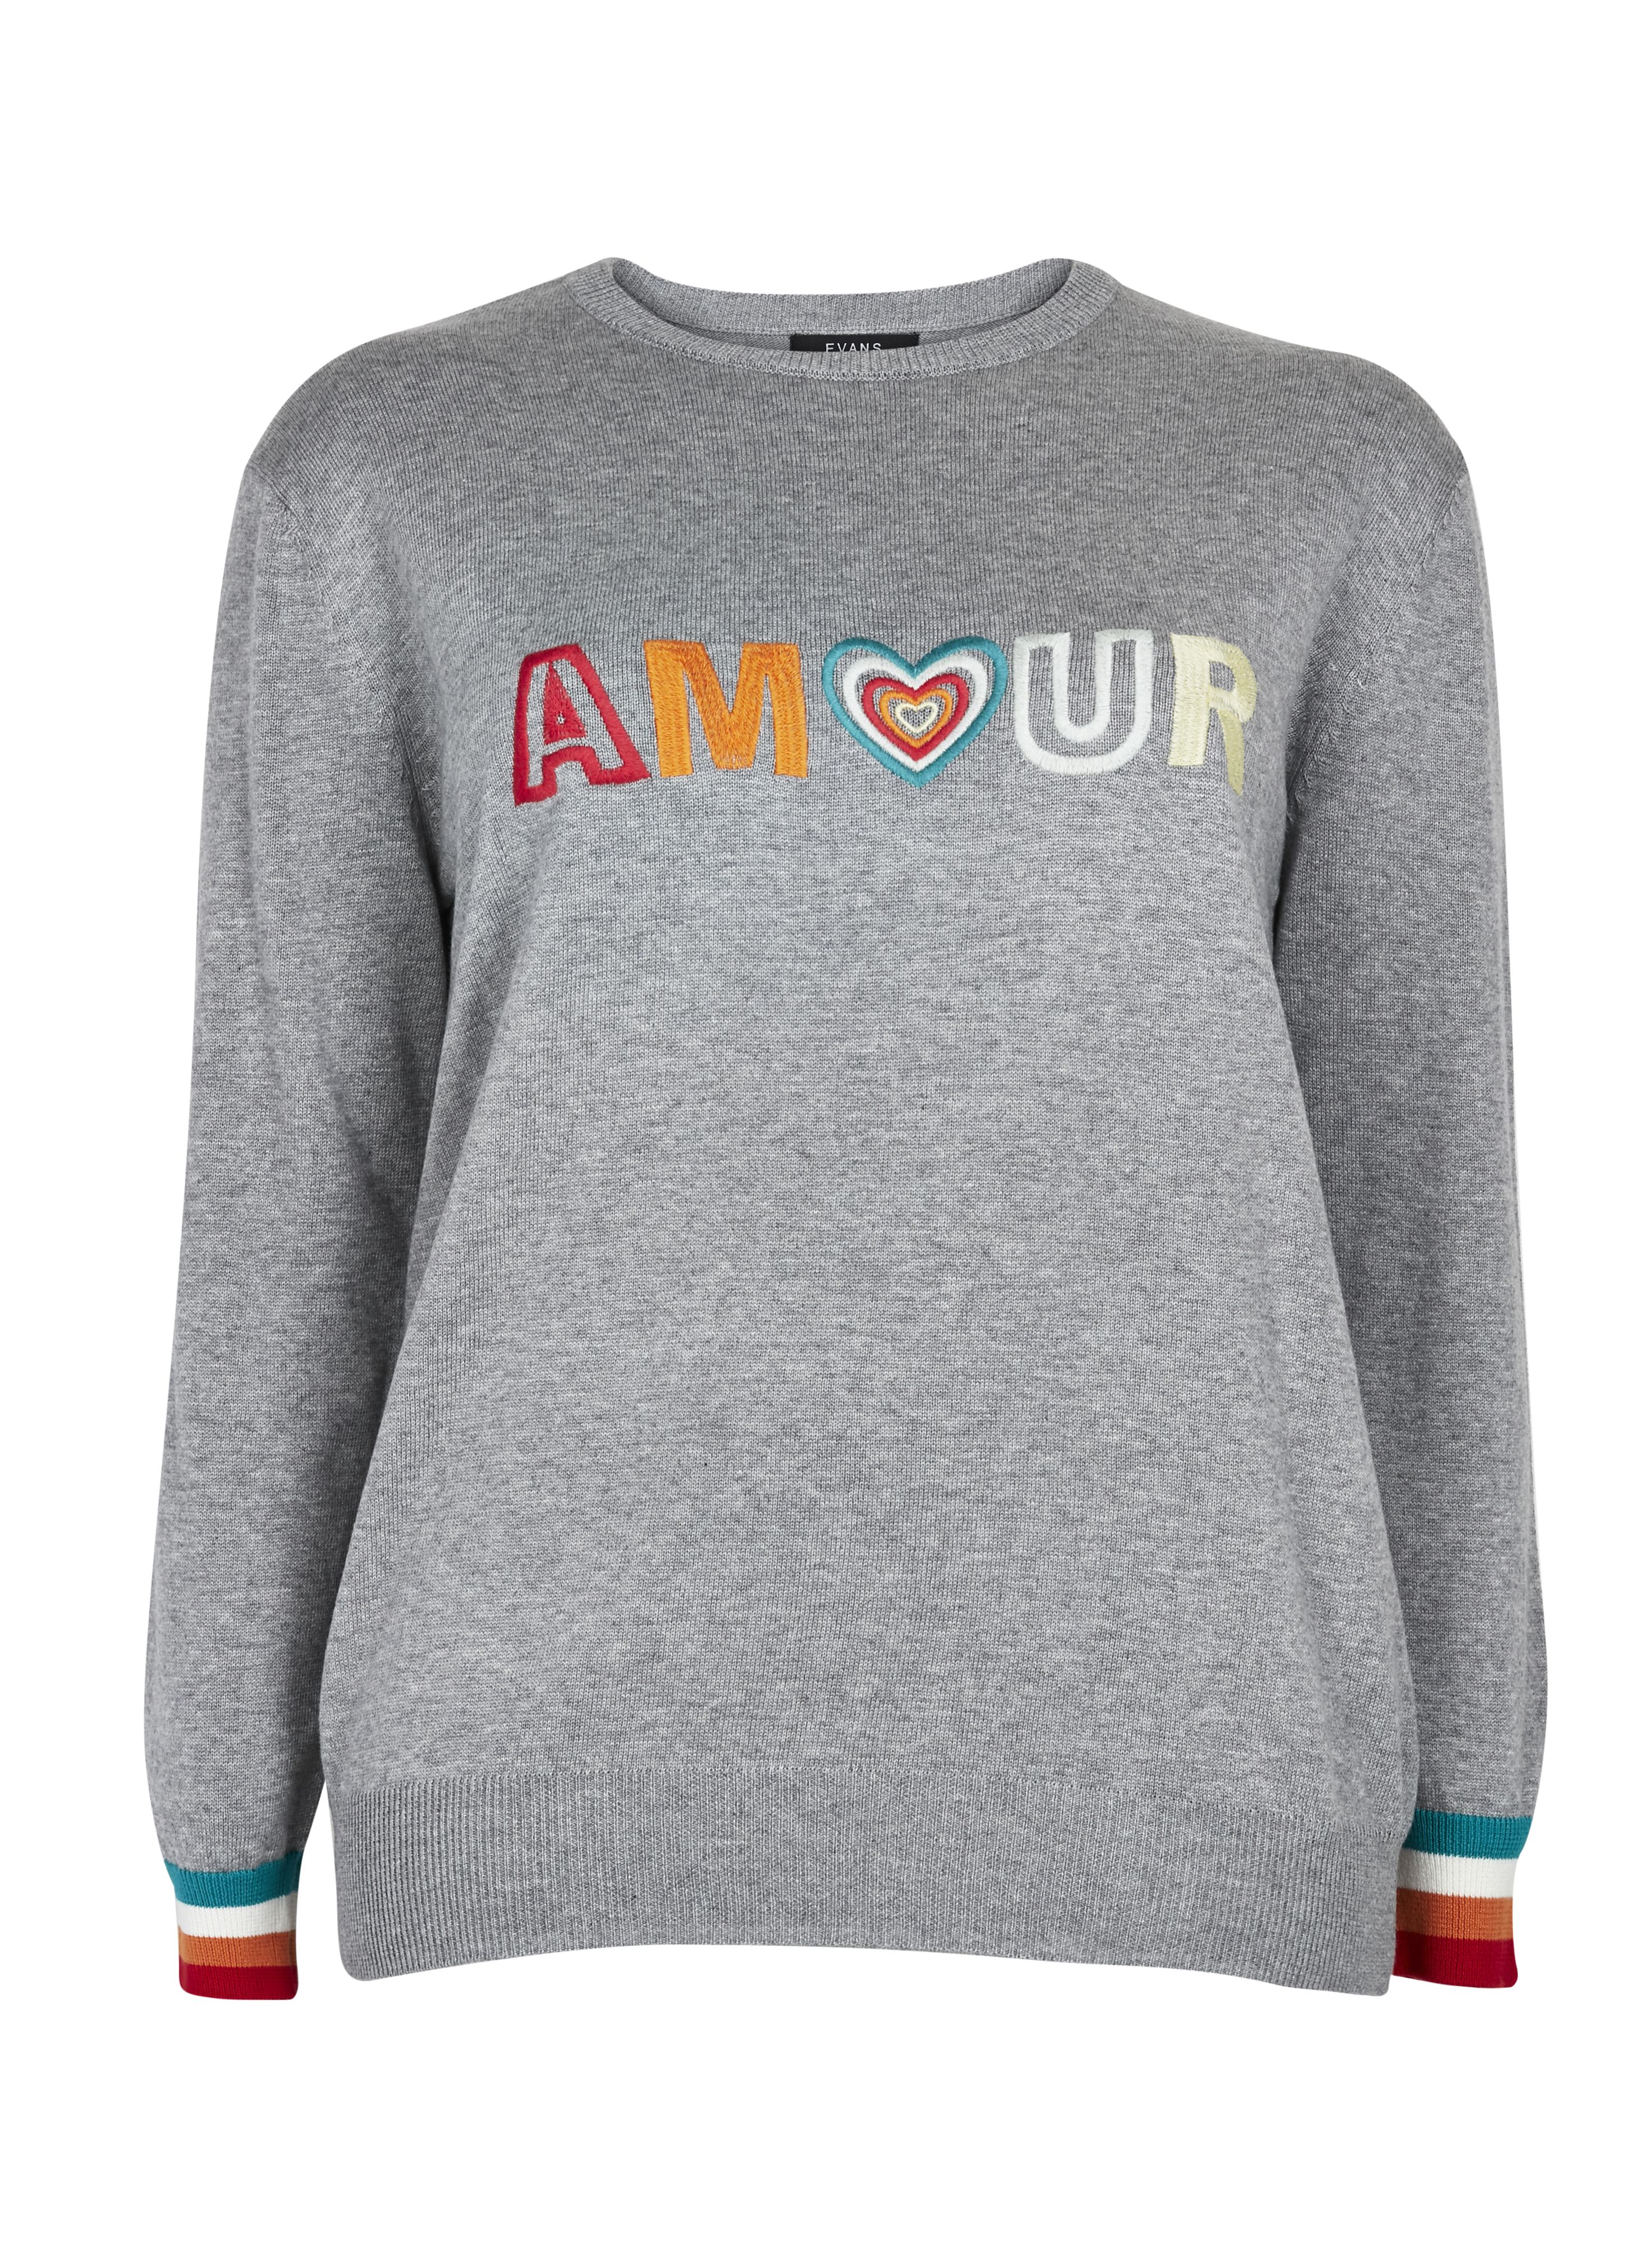 This cute slogan jumper will add a pop of colour to your everyday wardrobe. Rainbow detailing and a cute heart design keep this contemporary, whilst a relaxed fit and laid-back grey hue will have you wearing this on-repeat. Wear with jeans and chunky ankle boots, layering over a padded coat for cosy winter walks.  Jumper Round neck Long sleeve Relaxed Casual 56% Acrylic, 44% Cotton Machine washable